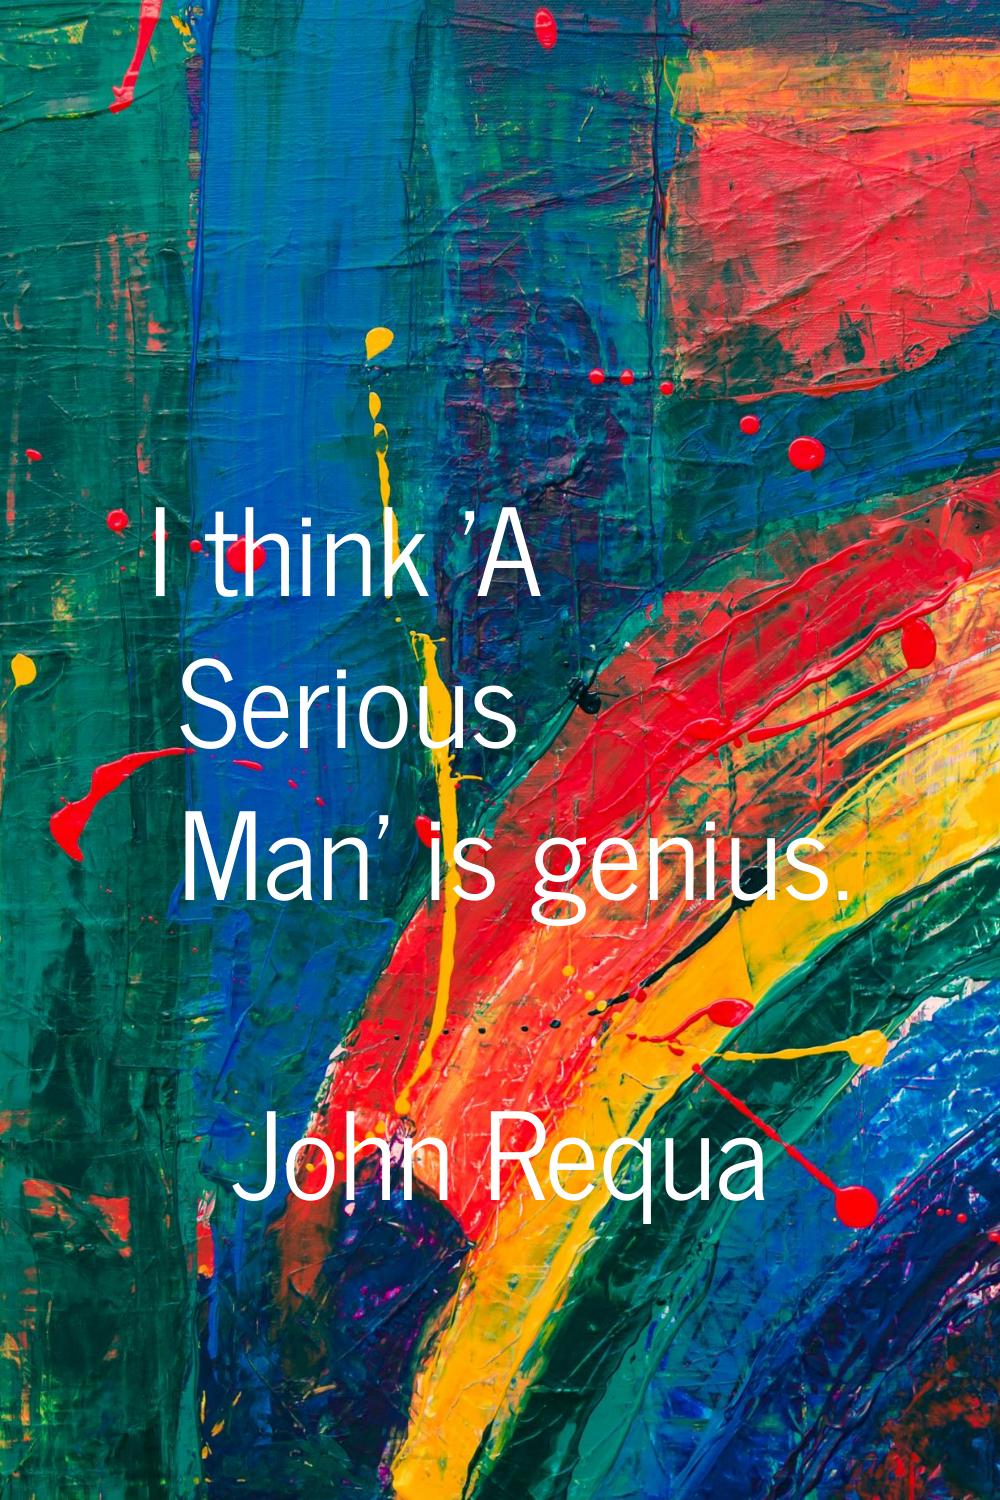 I think 'A Serious Man' is genius.